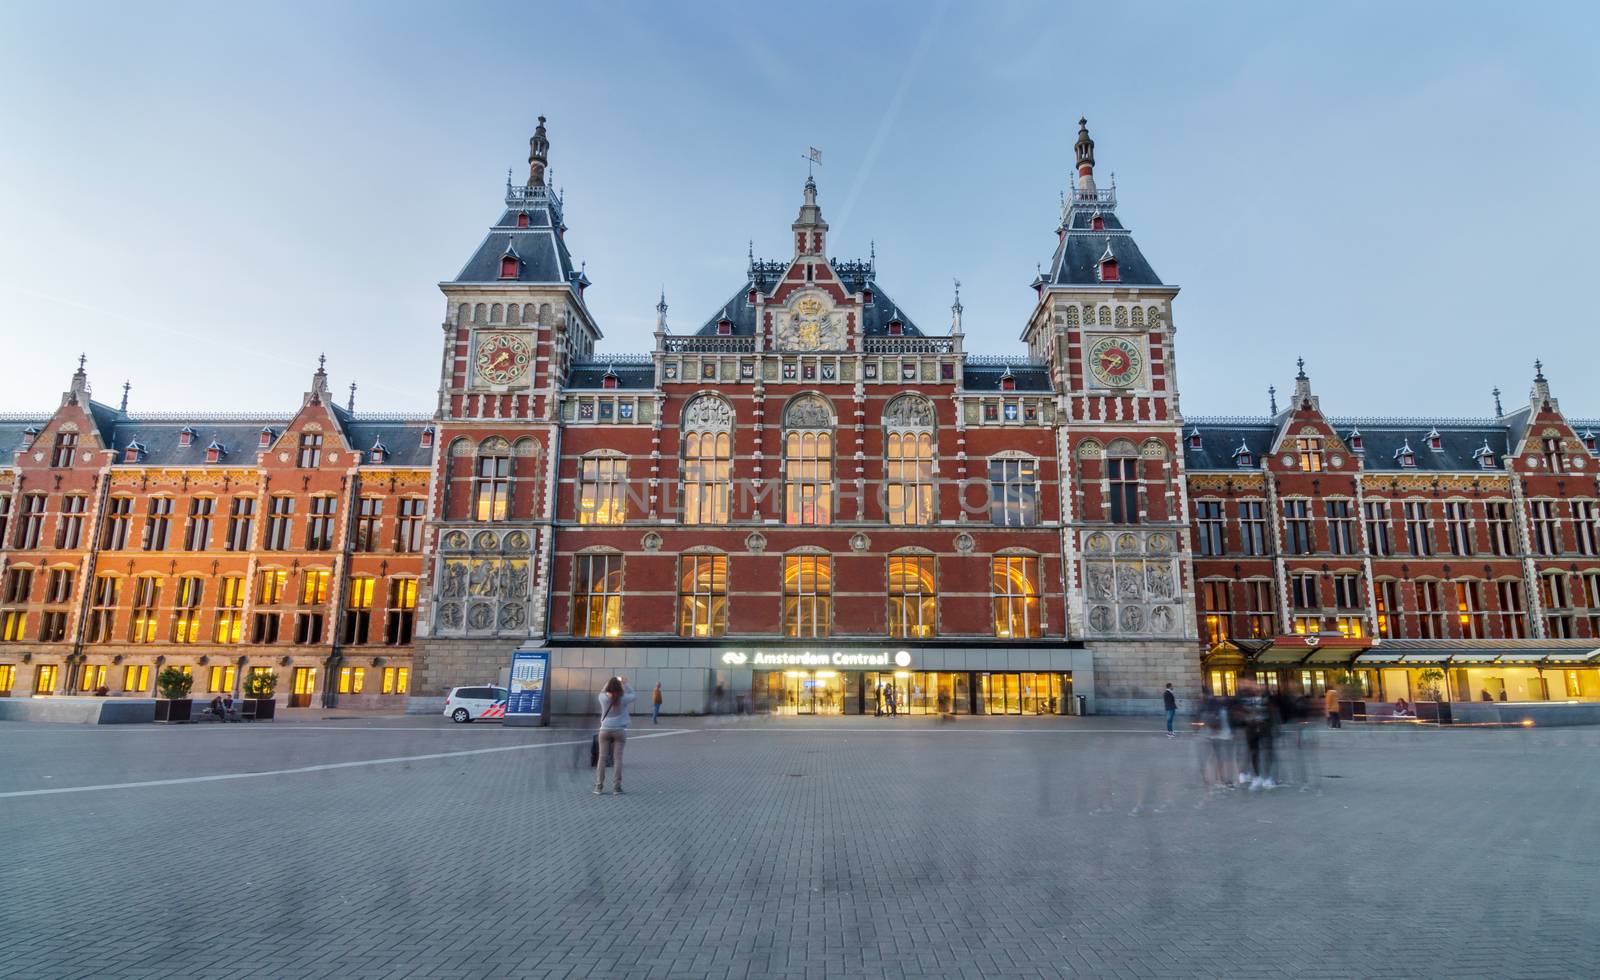 Amsterdam, Netherlands - May 8, 2015: People at Amsterdam Central station by siraanamwong